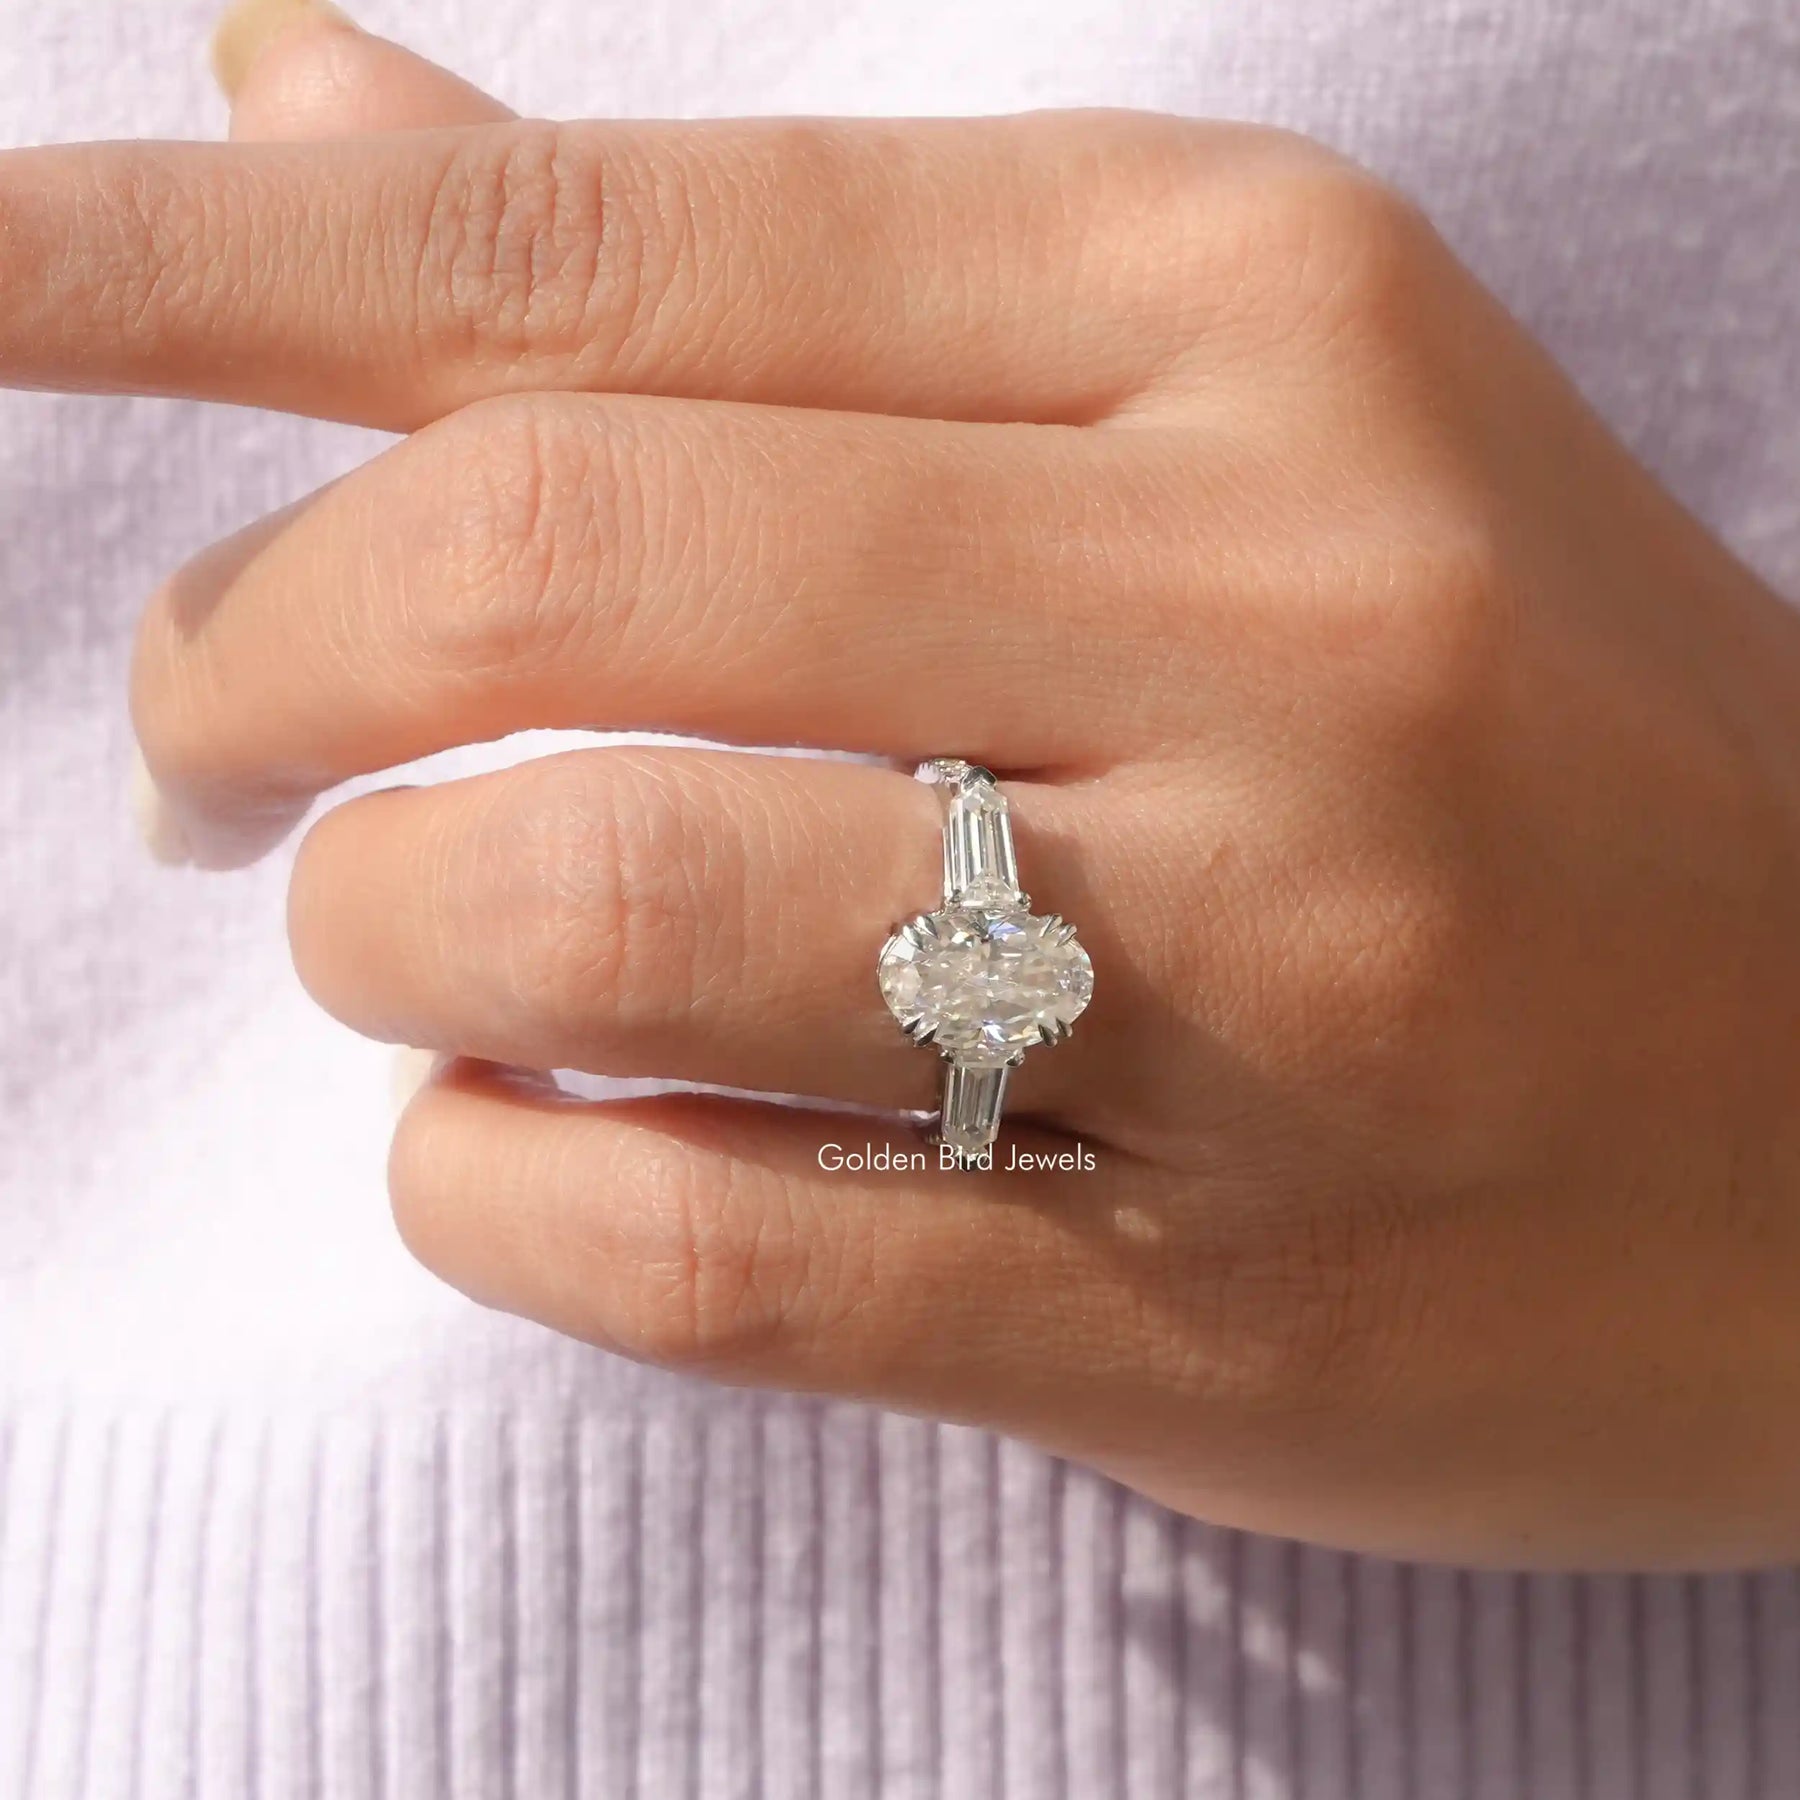 [In finger front view of crushed ice oval cut three stone ring]-[Golden Bird Jewels]